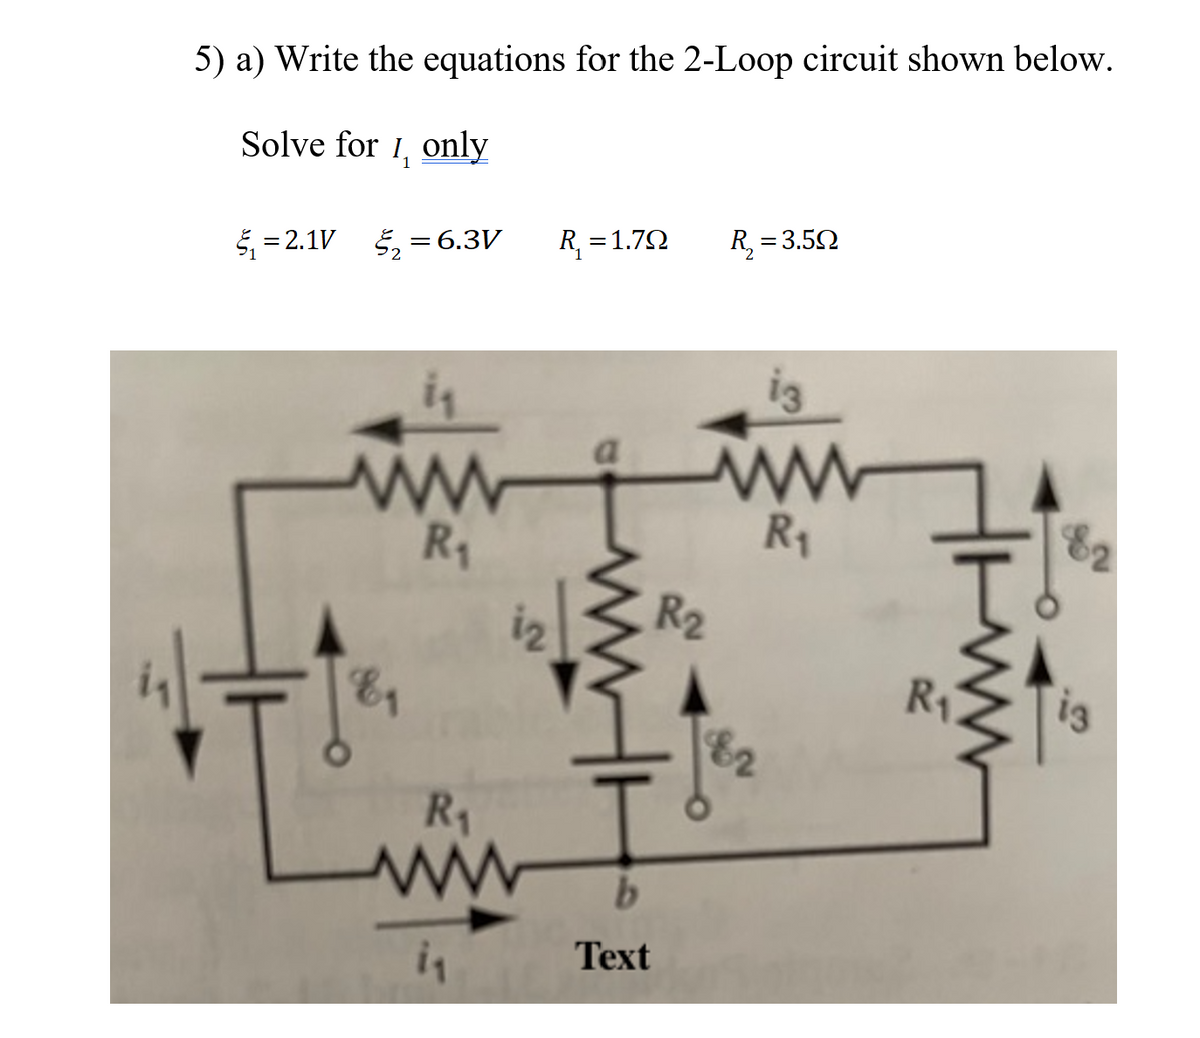 5) a) Write the equations for the 2-Loop circuit shown below.
Solve for 1, only
5 = 2.1V 5, =6.3V
R, =1.72
R, = 3.52
in
a
R1
R1
82
iz
R2
R1
82
R1
Тext
